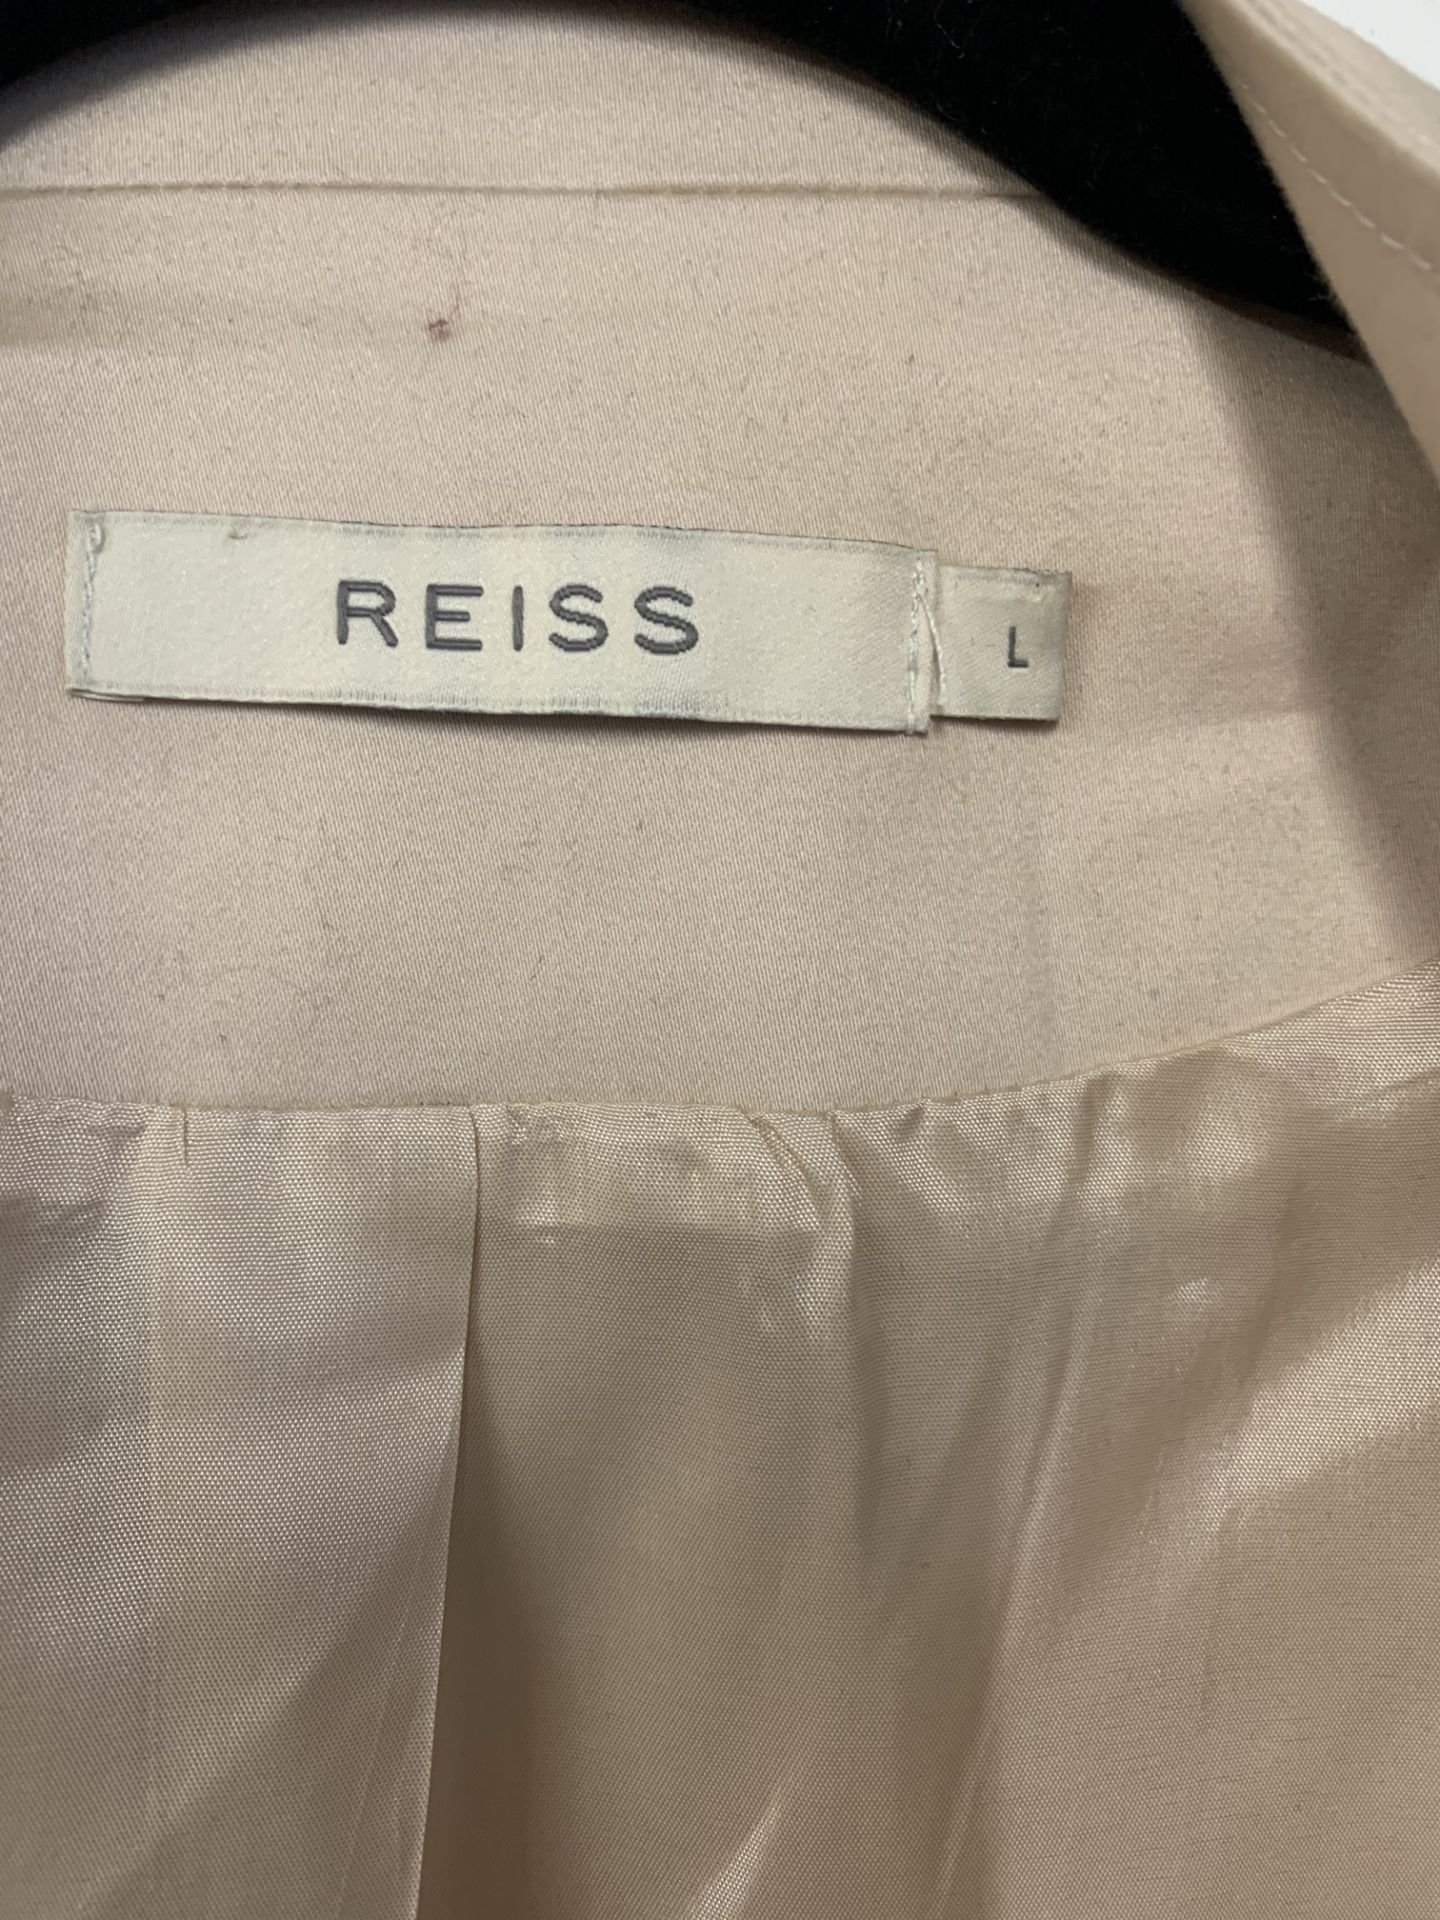 Riess pleated jacket - Image 2 of 2